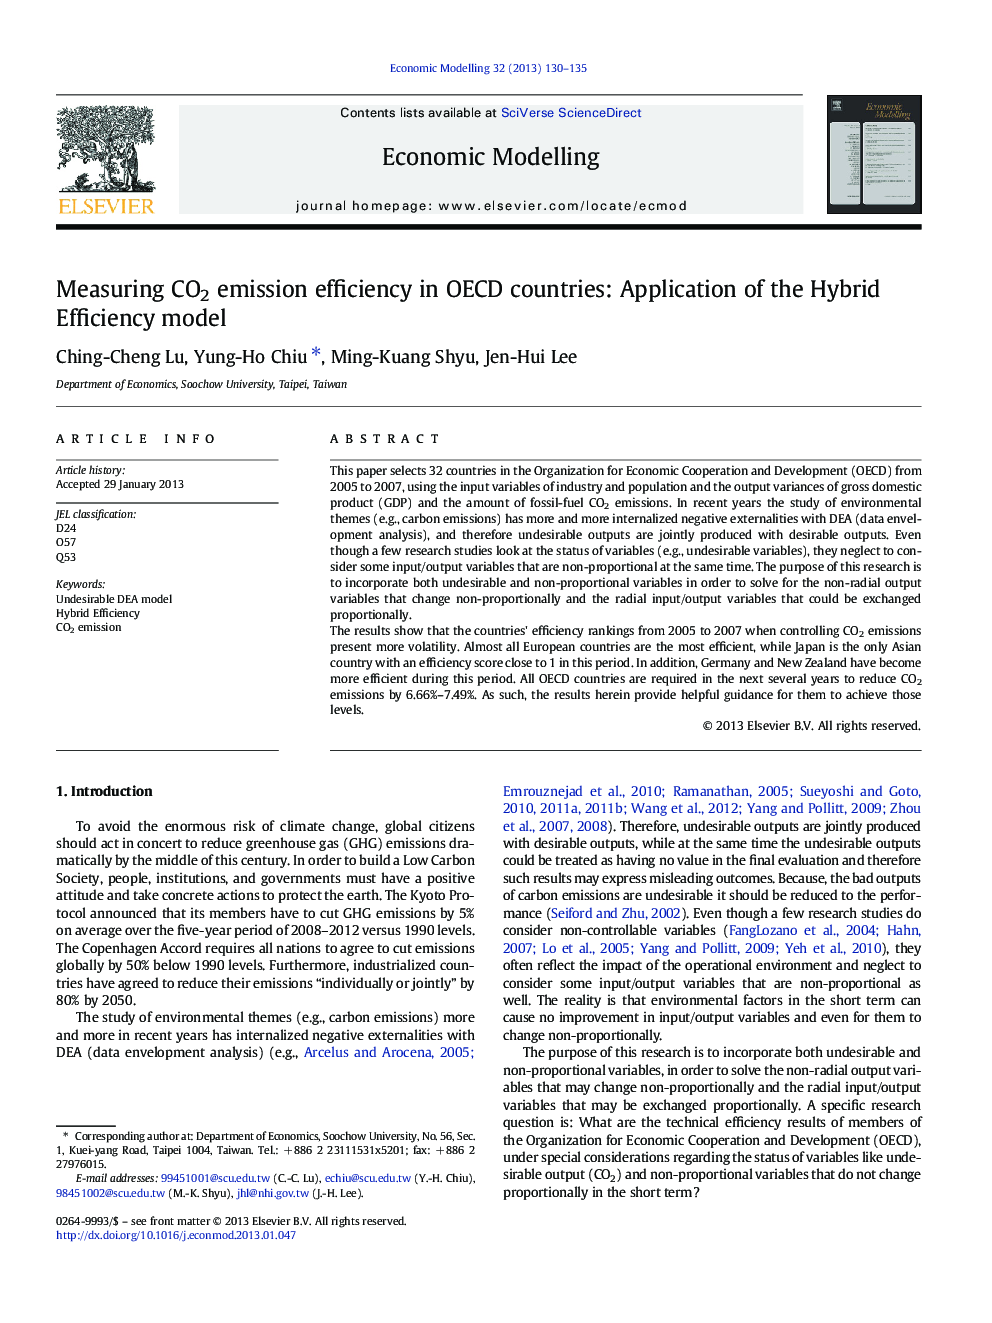 Measuring CO2 emission efficiency in OECD countries: Application of the Hybrid Efficiency model